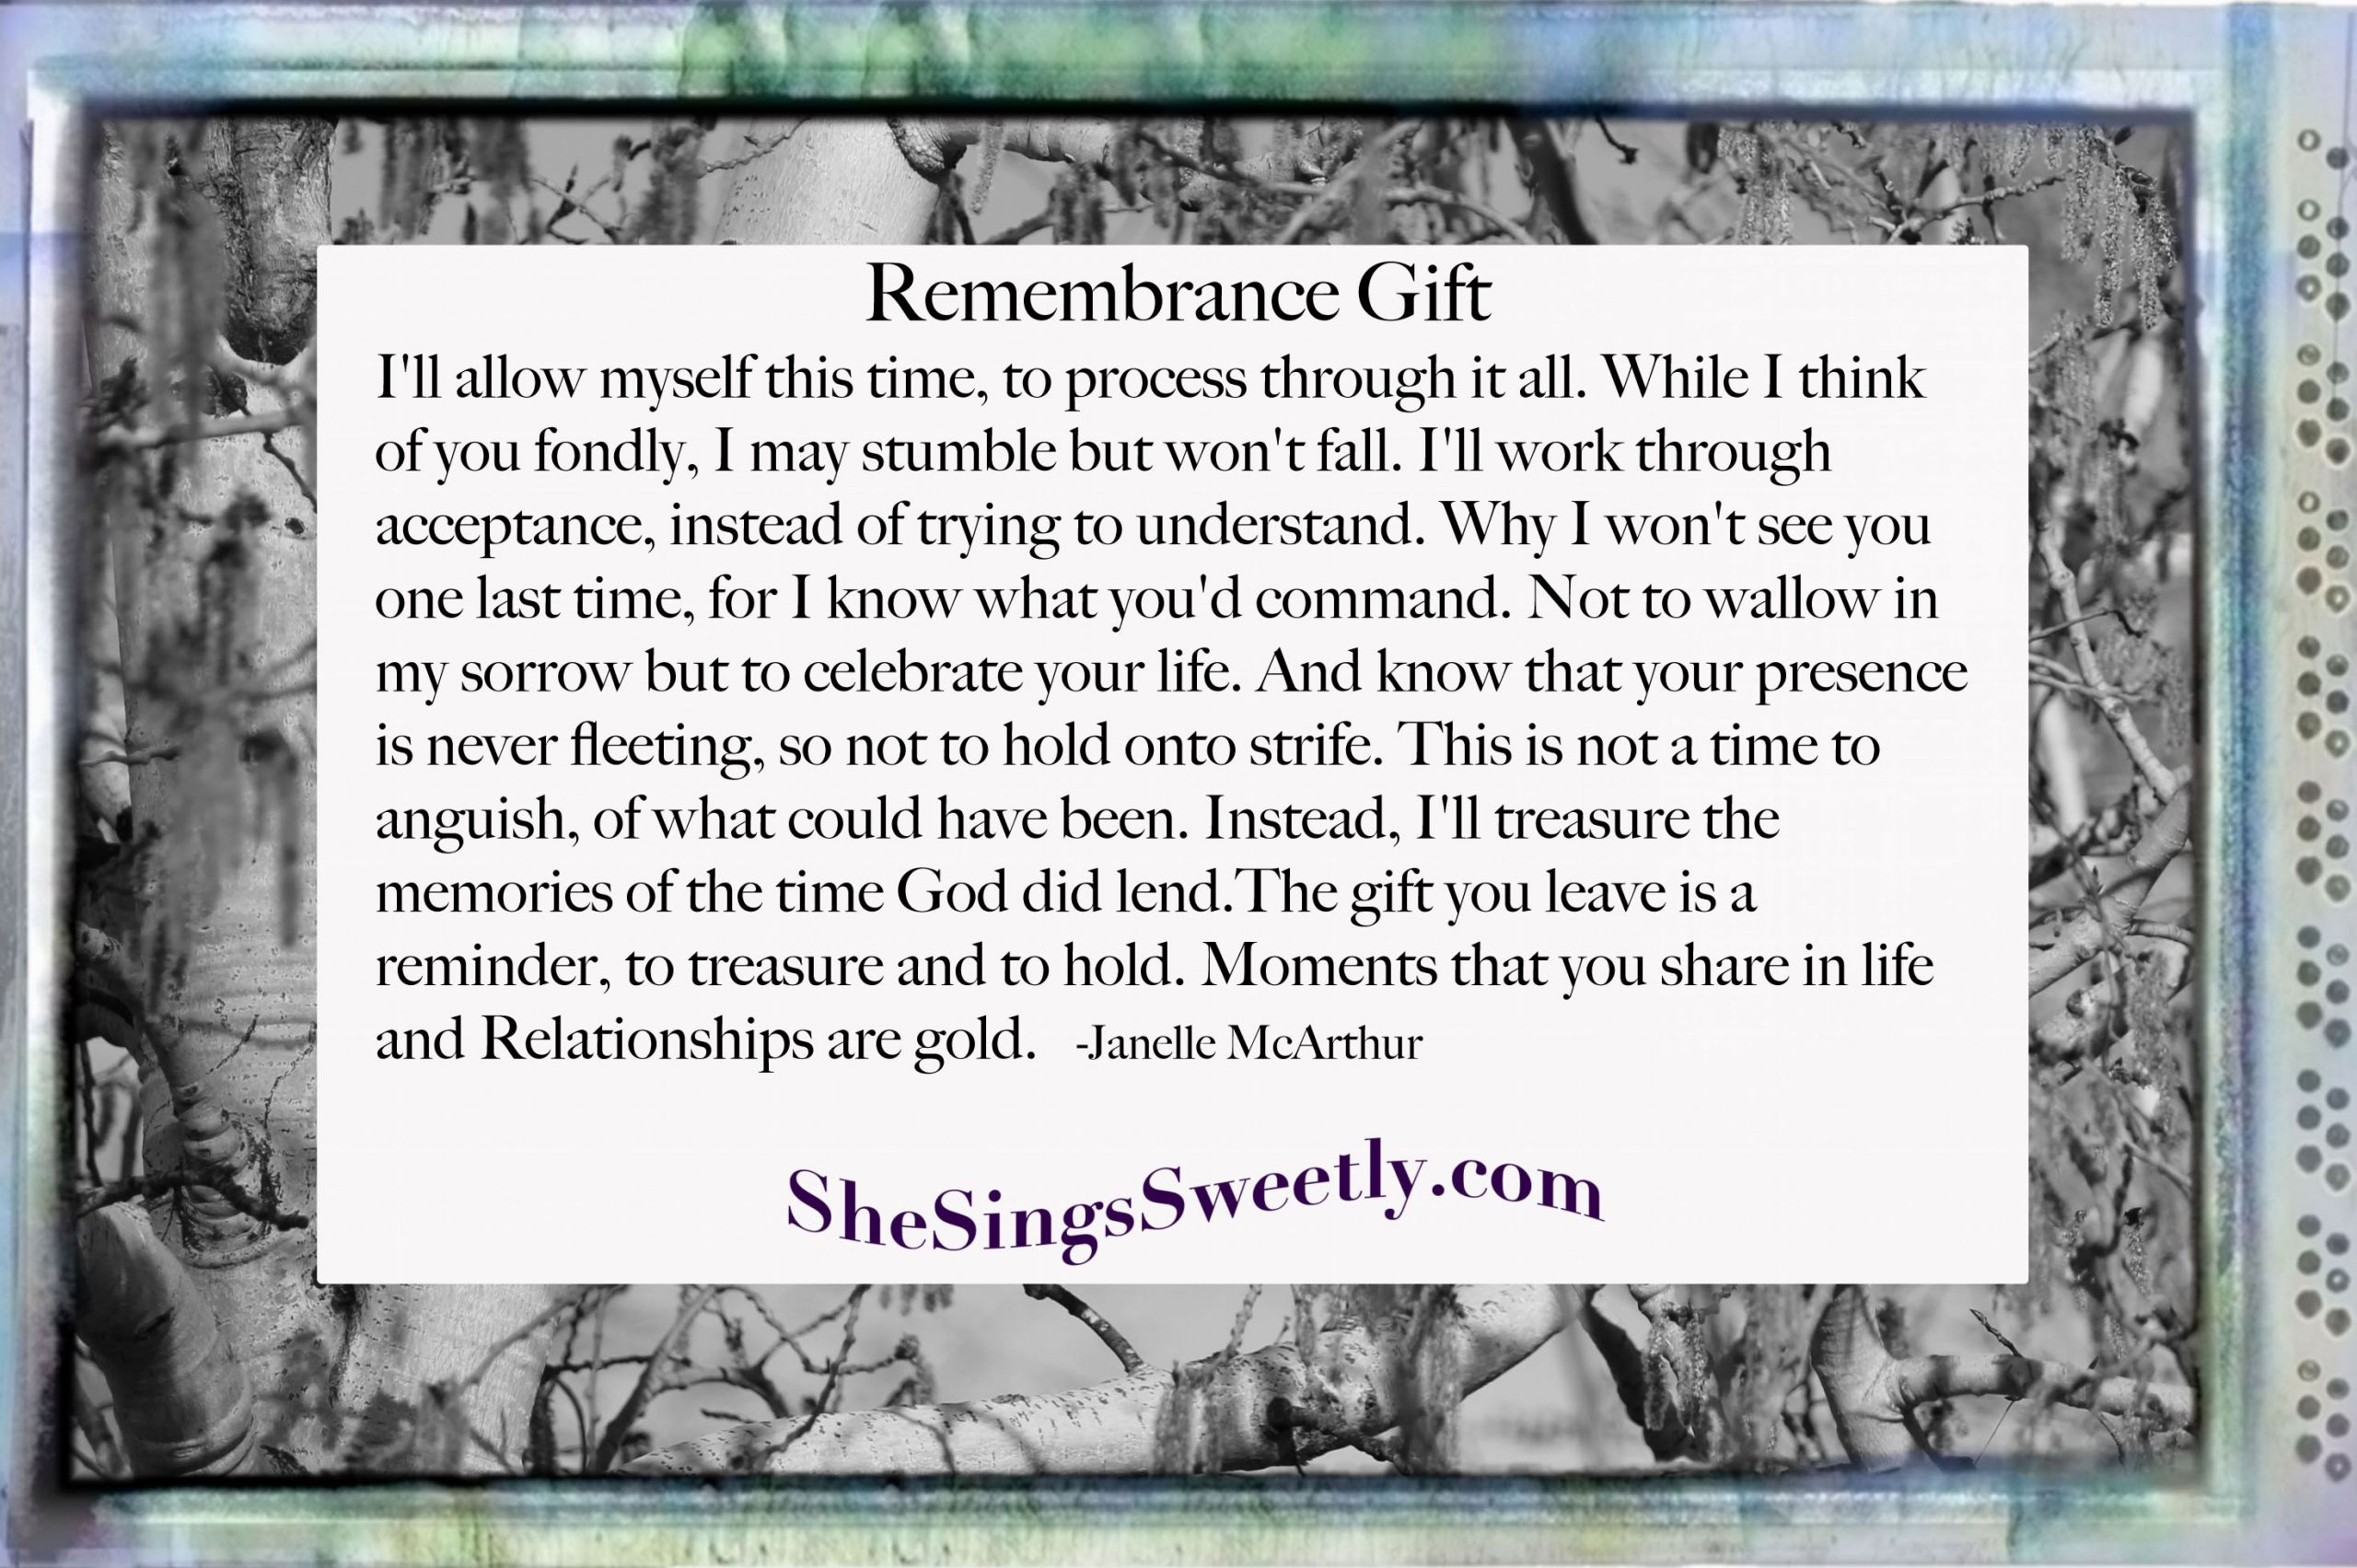 Quote About Losing A Family Member
 Sad Quotes About Death A Family Member QuotesGram